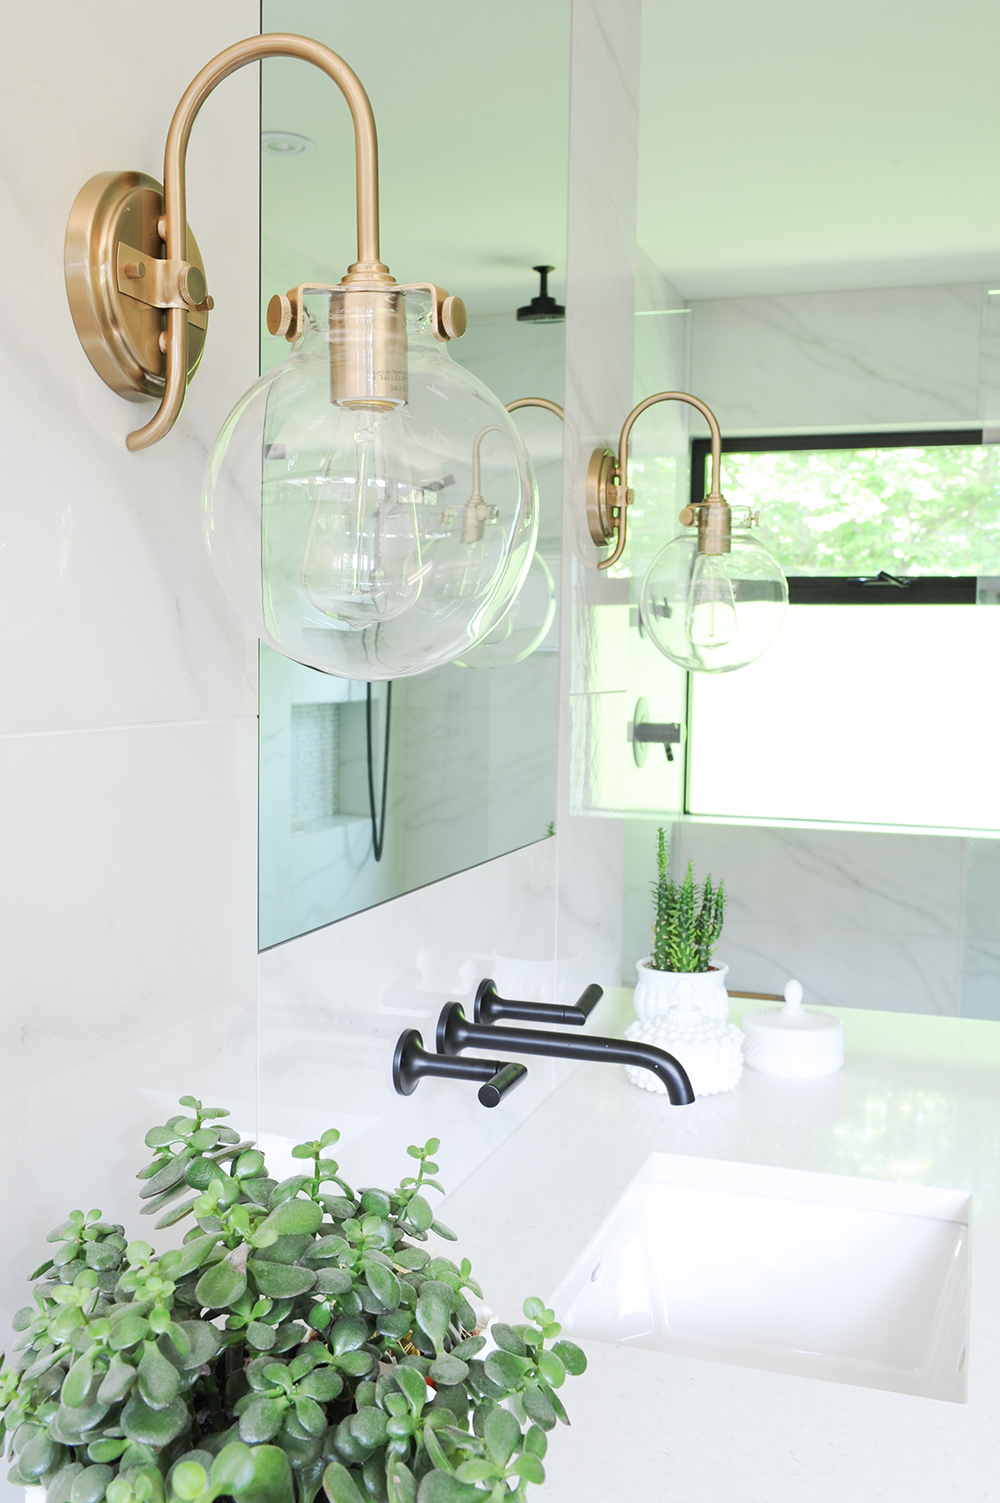 Brass sconces over sink with black faucet